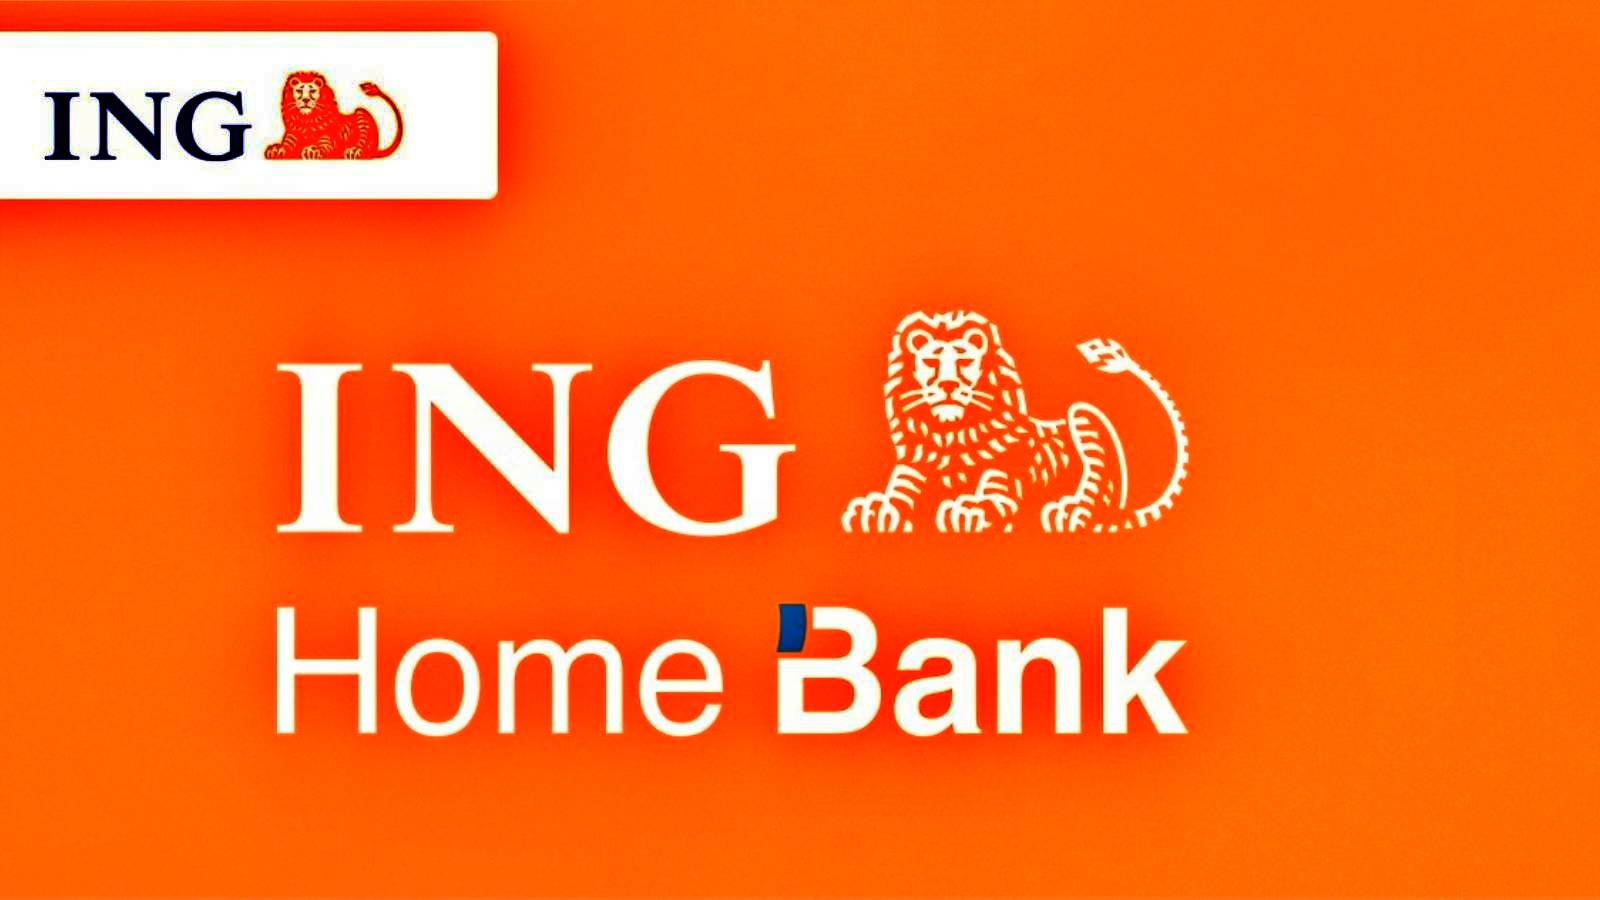 ING Bank Official LAST MINUTE ALERT Targets All Romanian Customers